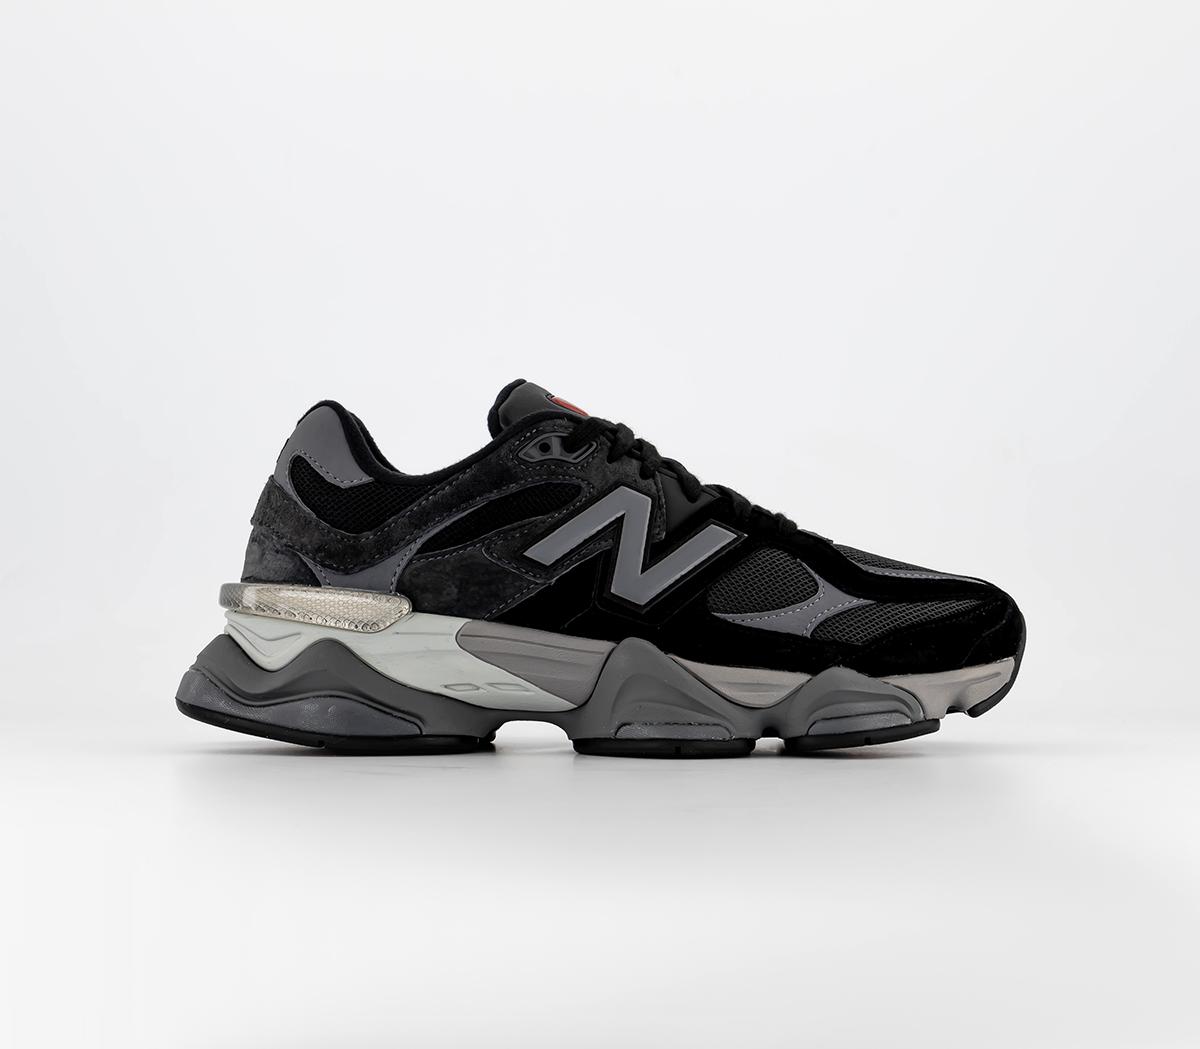 New Balance 9060 Trainers Black - Men's Trainers